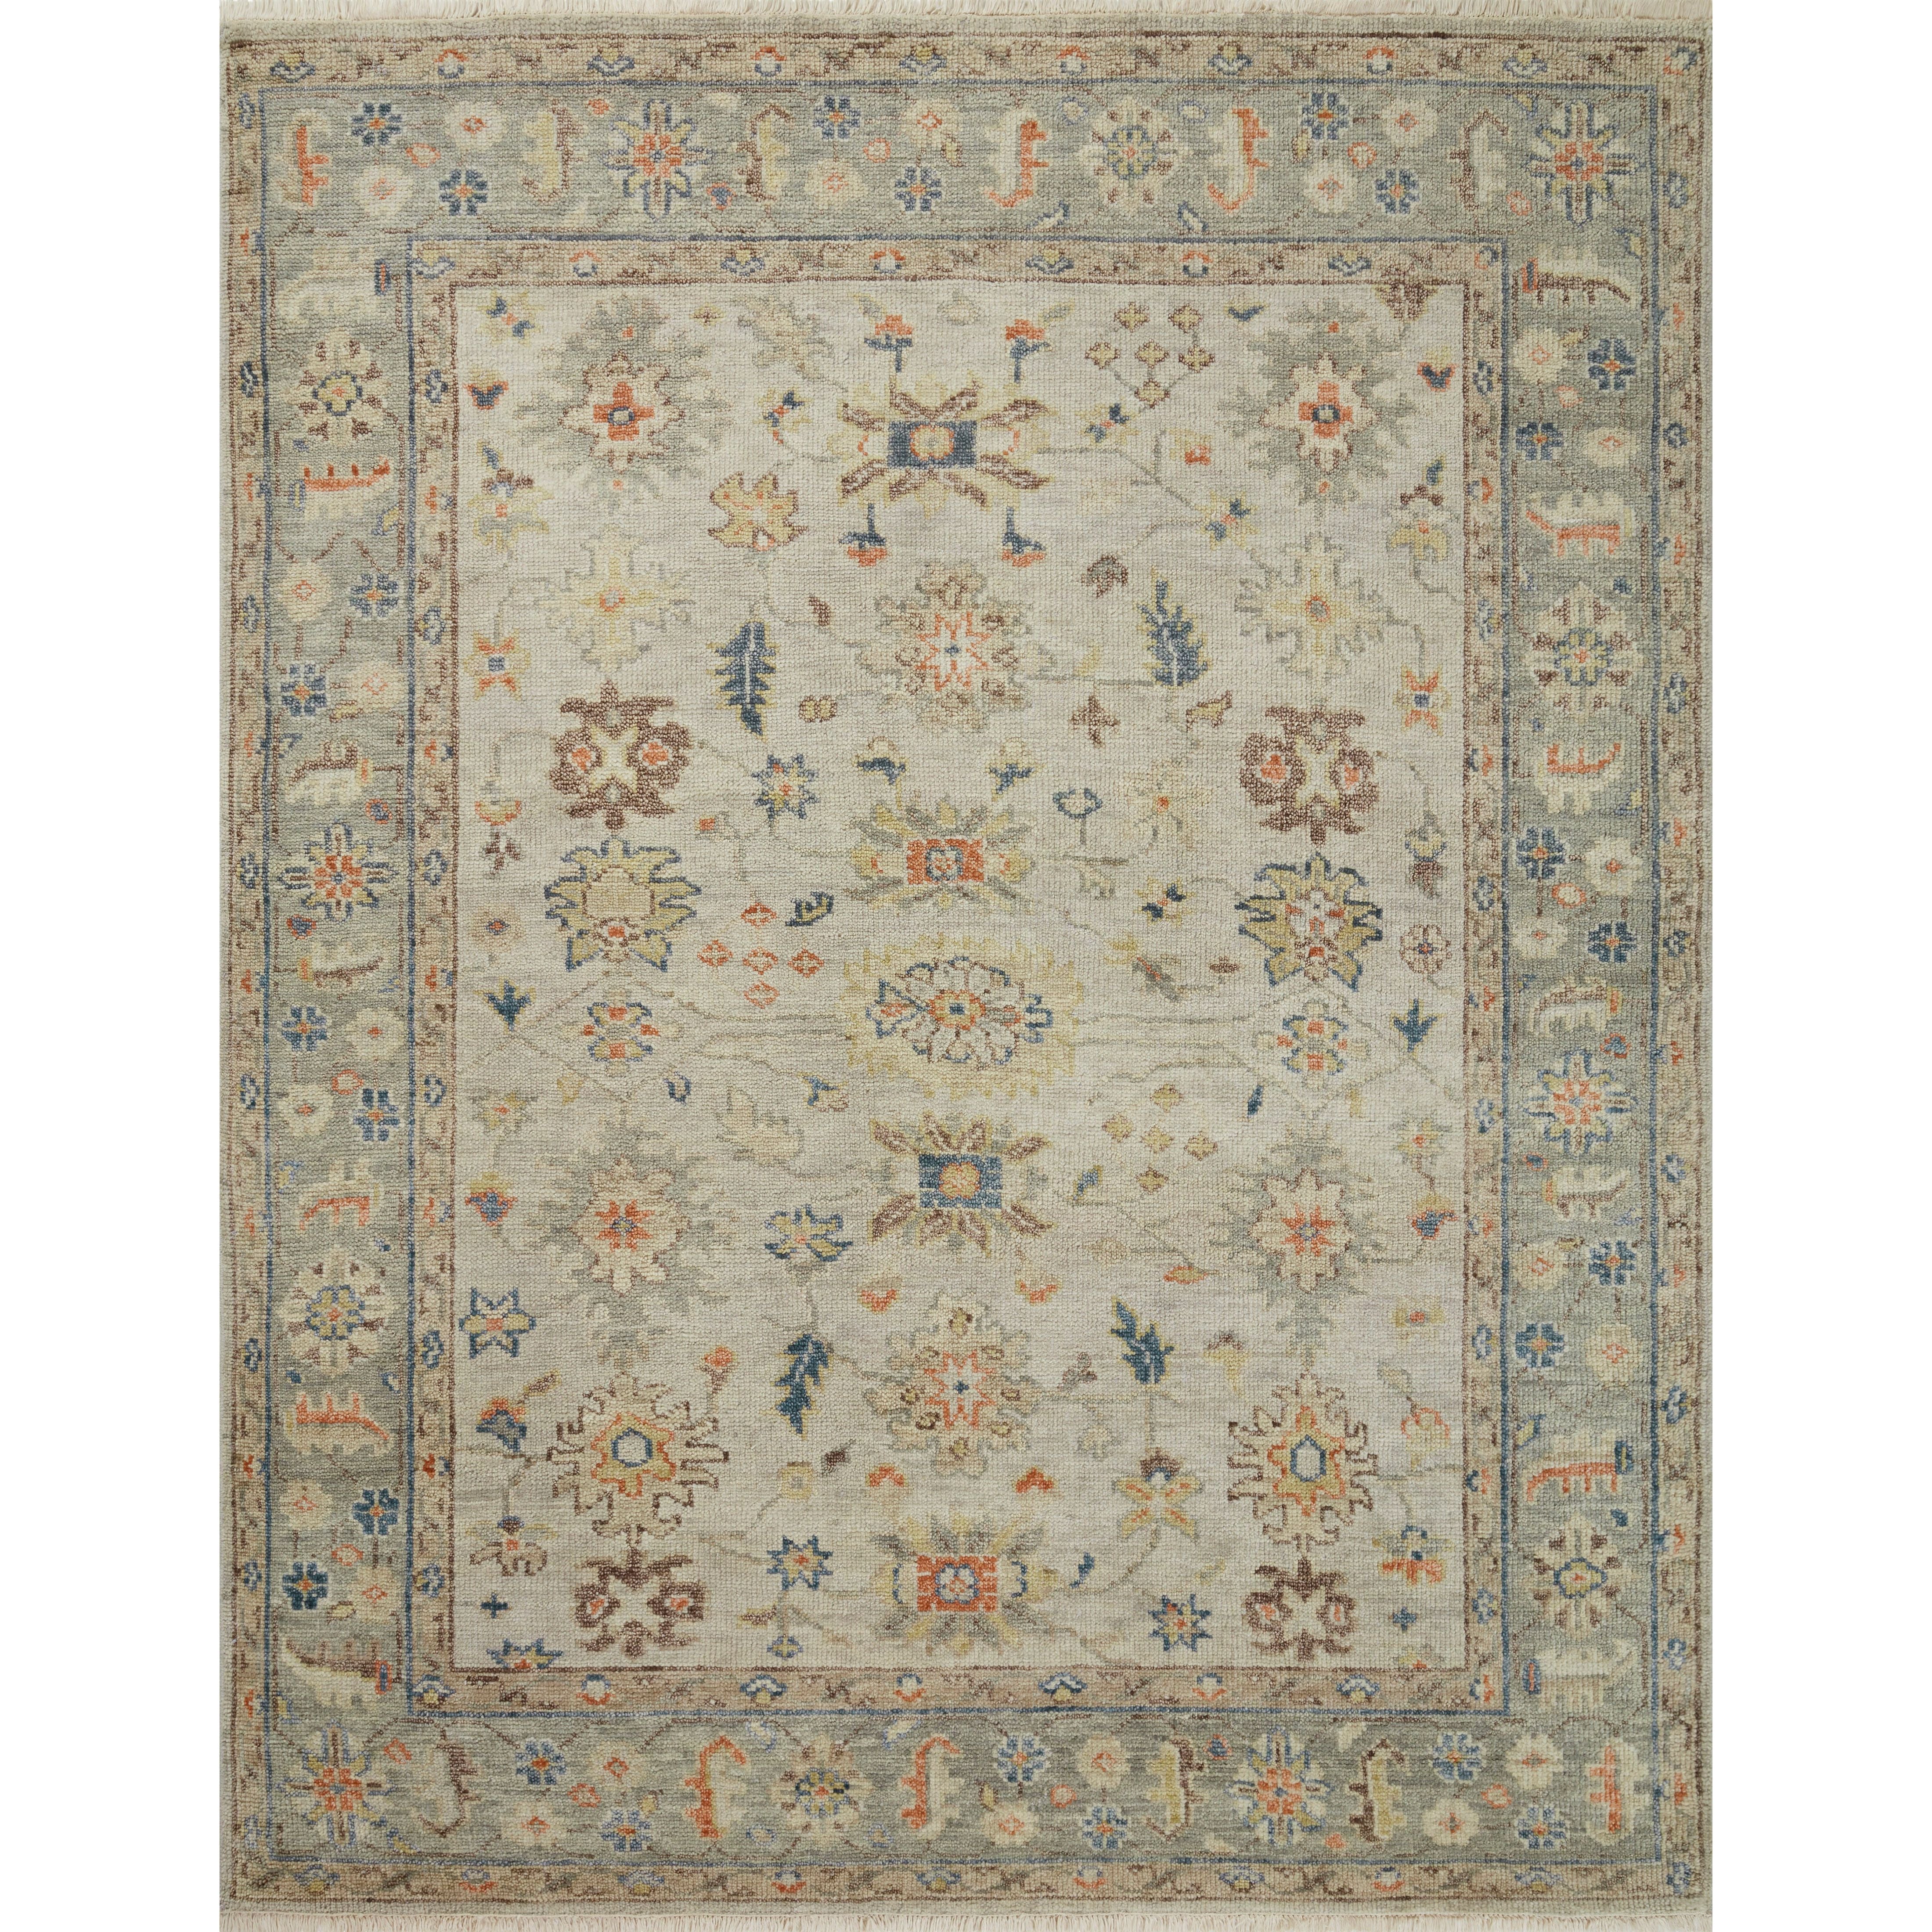 The Helena Stone / Multi HEL-09 area Rug from Loloi is hand-knotted of 100% wool, refined, yet versatile for any home. The Helena rug combines weathered tones and worldly patterns for a beautiful grounding element in any room.The Helena Stone / Multi HEL-09 area Rug from Loloi is hand-knotted of 100% wool, refined, yet versatile for any home. The Helena rug combines weathered tones and worldly patterns for a beautiful grounding element in any room.